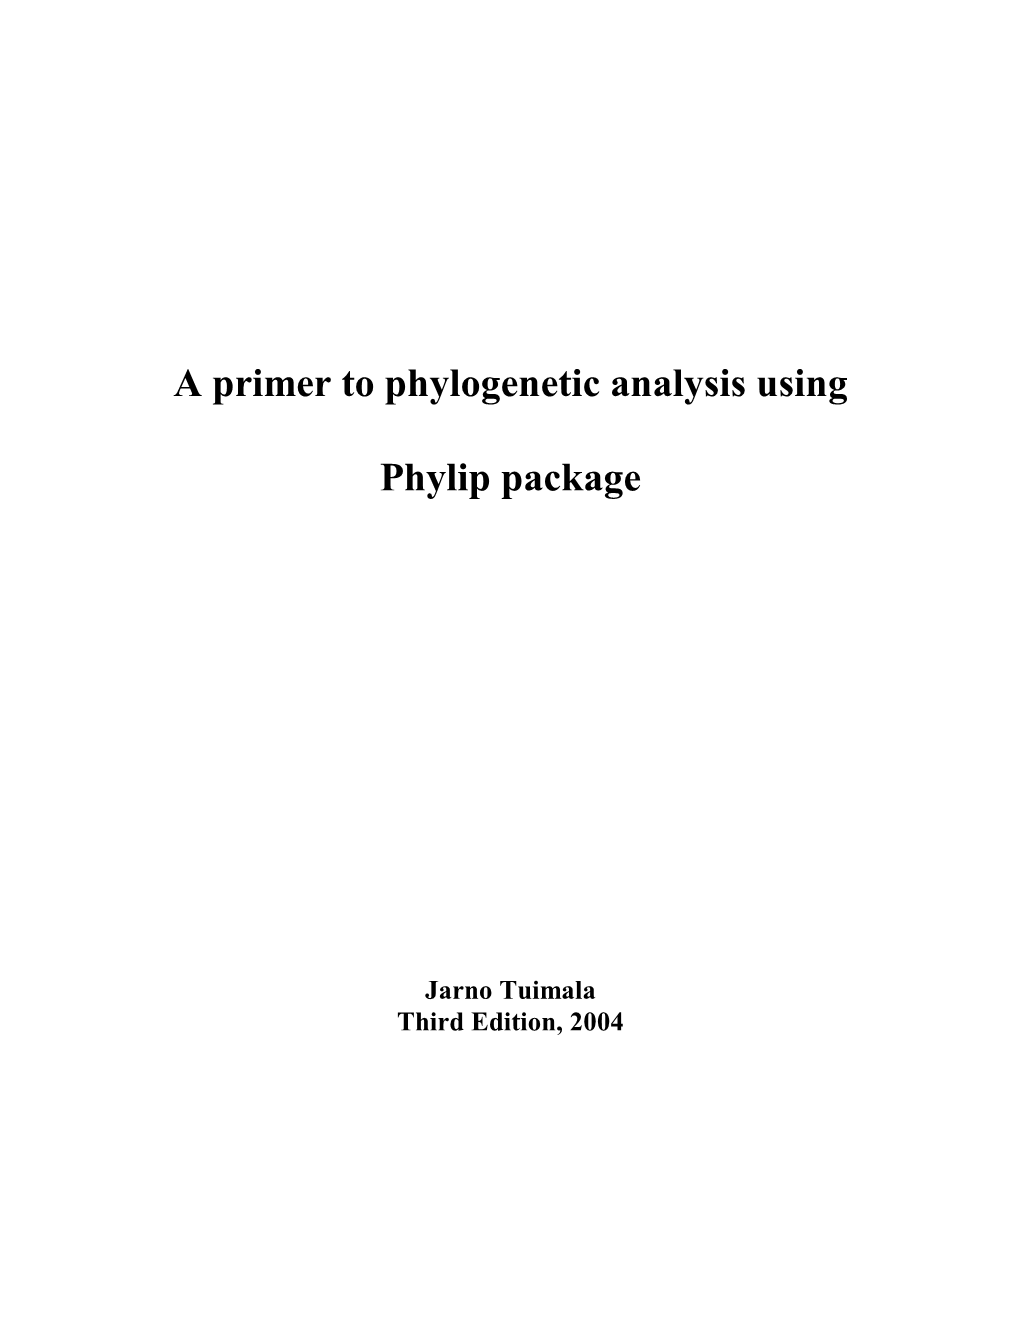 A Primer to Phylogenetic Analysis Using Phylip Package